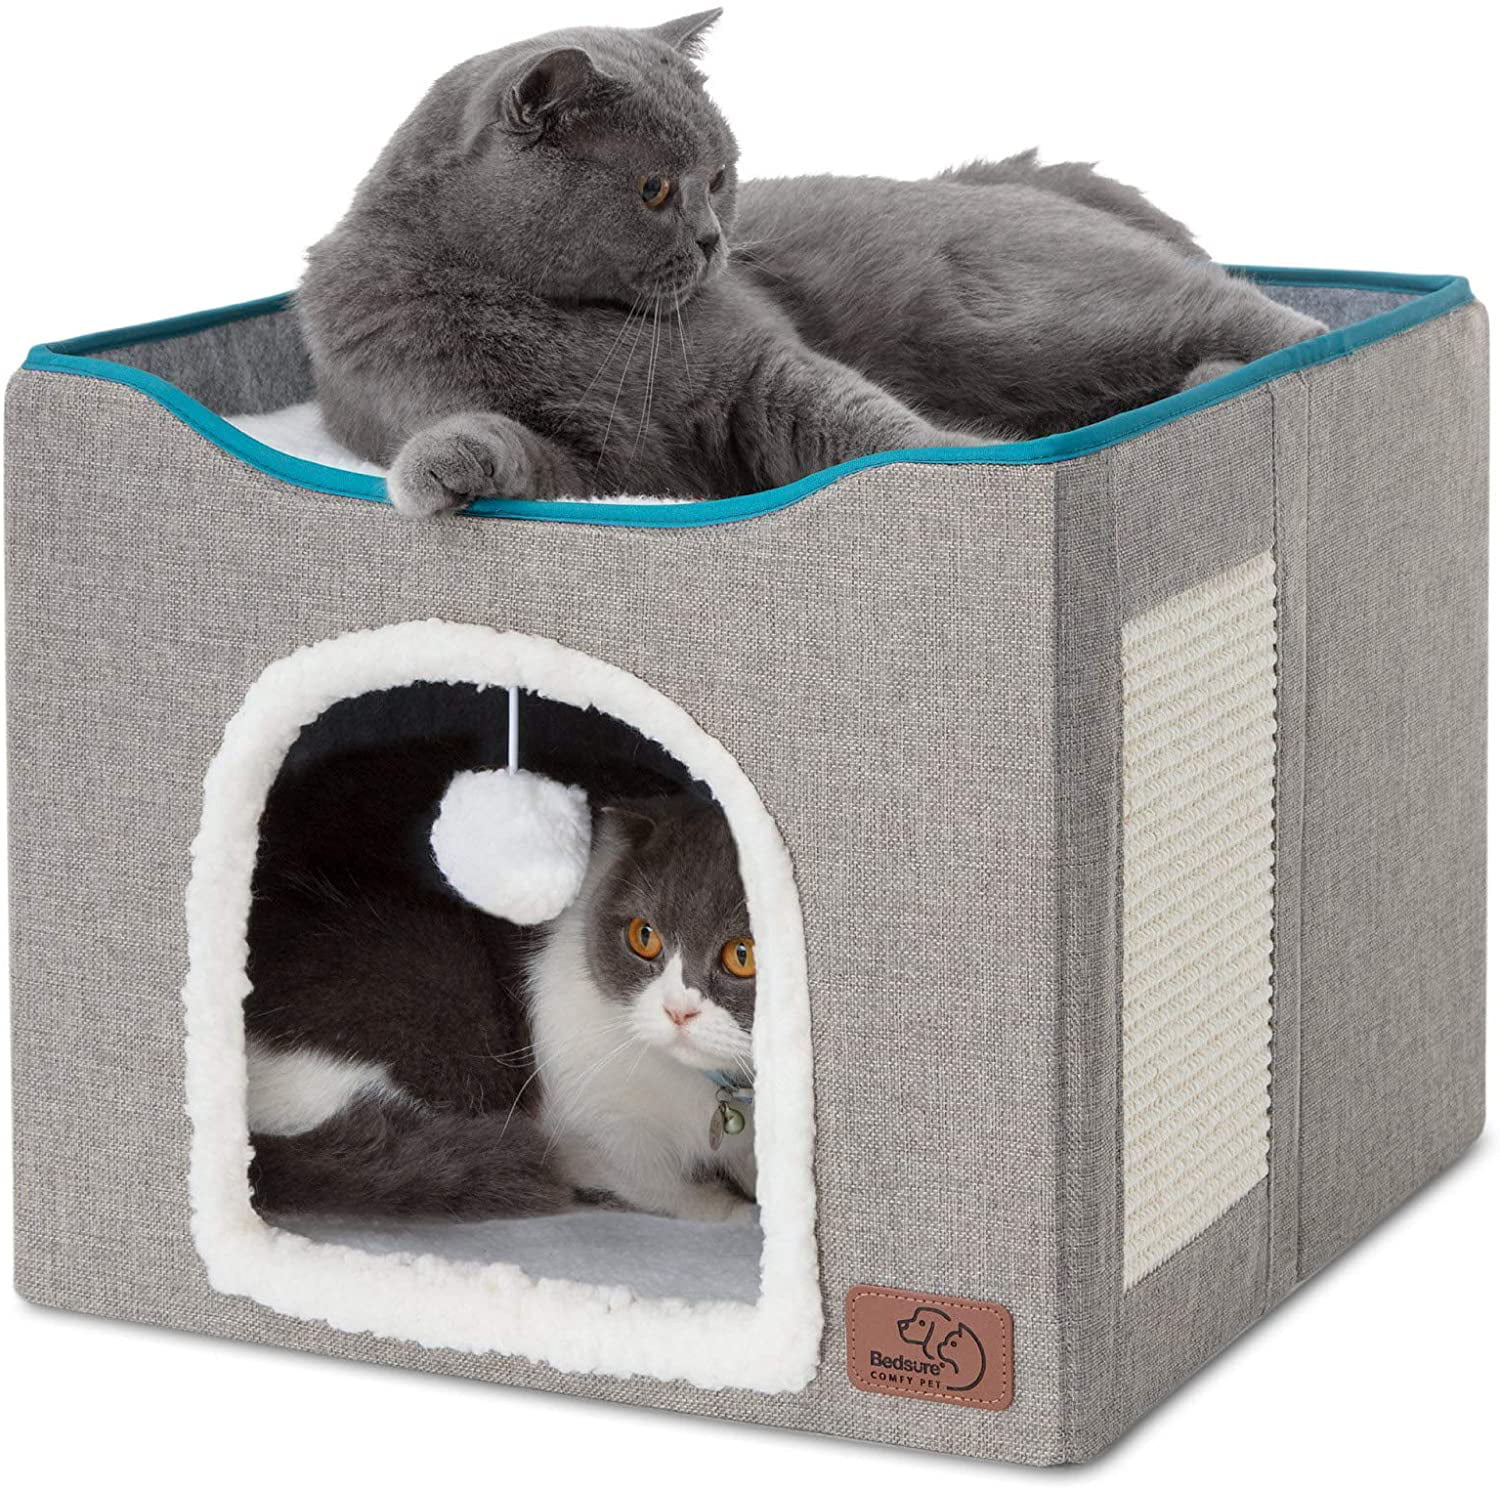 High-Strength Wood Board Without Odor Teodty Cat Beds for Indoor Cats Soft Fabric Can be Double-Sided Use Cat Cave for Cat House with Scratch Pad 